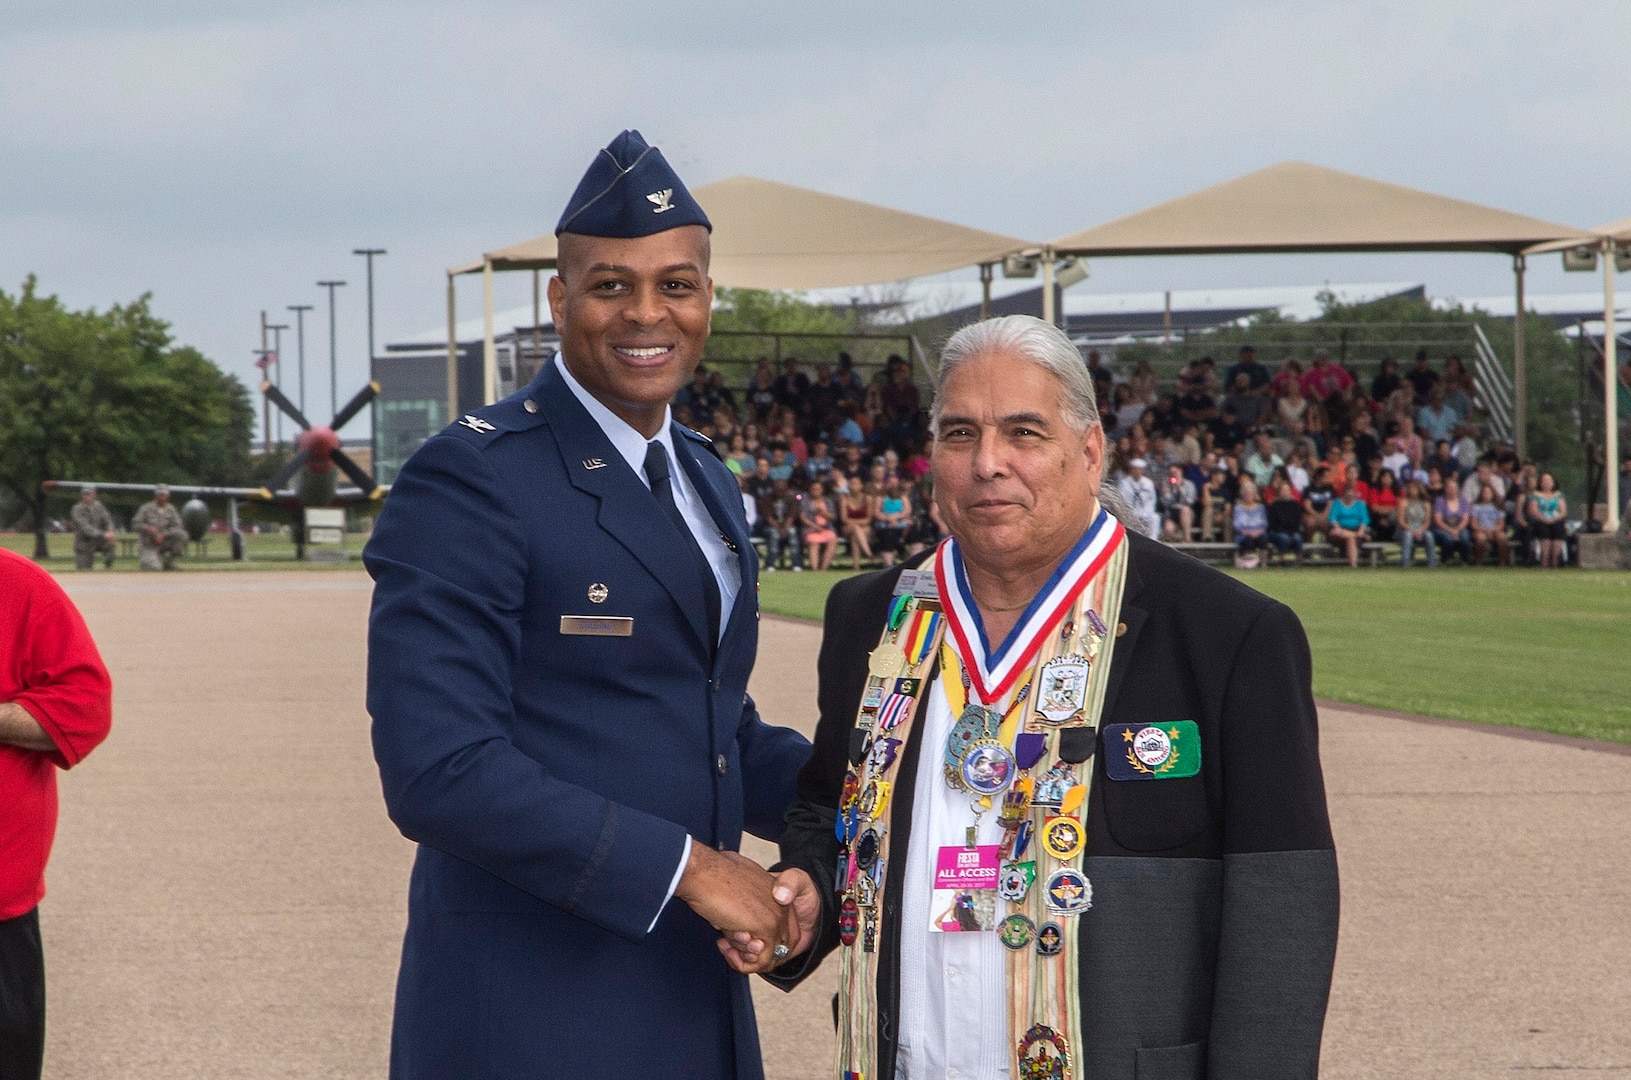 Col. Roy Collins, 37th Training Wing commander, give San Antonio Fiesta Commission president Erwin De Luna a gift during the Air Force Basic Military Training Fiesta graduation Parade April 21, 2017, at Joint Base San Antonio-Lackland, Texas. Each year, members of the Fiesta Royalty Court conduct the Royal Review of a BMT graduation during Fiesta San Antonio, a 10-day celebration of military history to honor the life and memory of the members who died in the Battle of the Alamo and the Battle of San Jacinto. Servicemembers from around JBSA participate in Fiesta San Antonio activities representing the progression of the United States military. (U.S. Air Force photo by Johnny Saldivar)